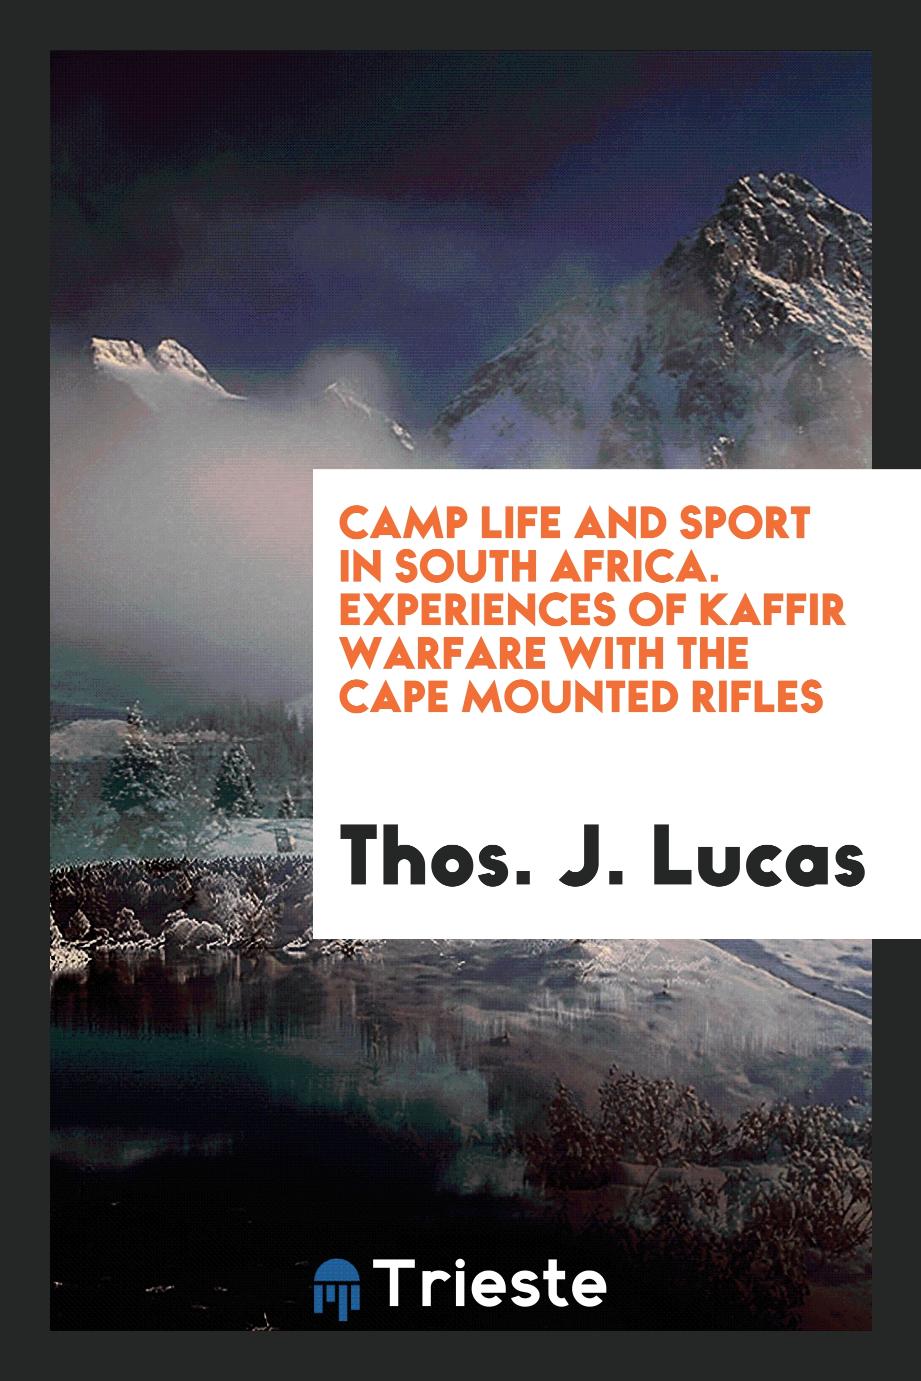 Camp life and sport in South Africa. Experiences of Kaffir warfare with the Cape Mounted Rifles